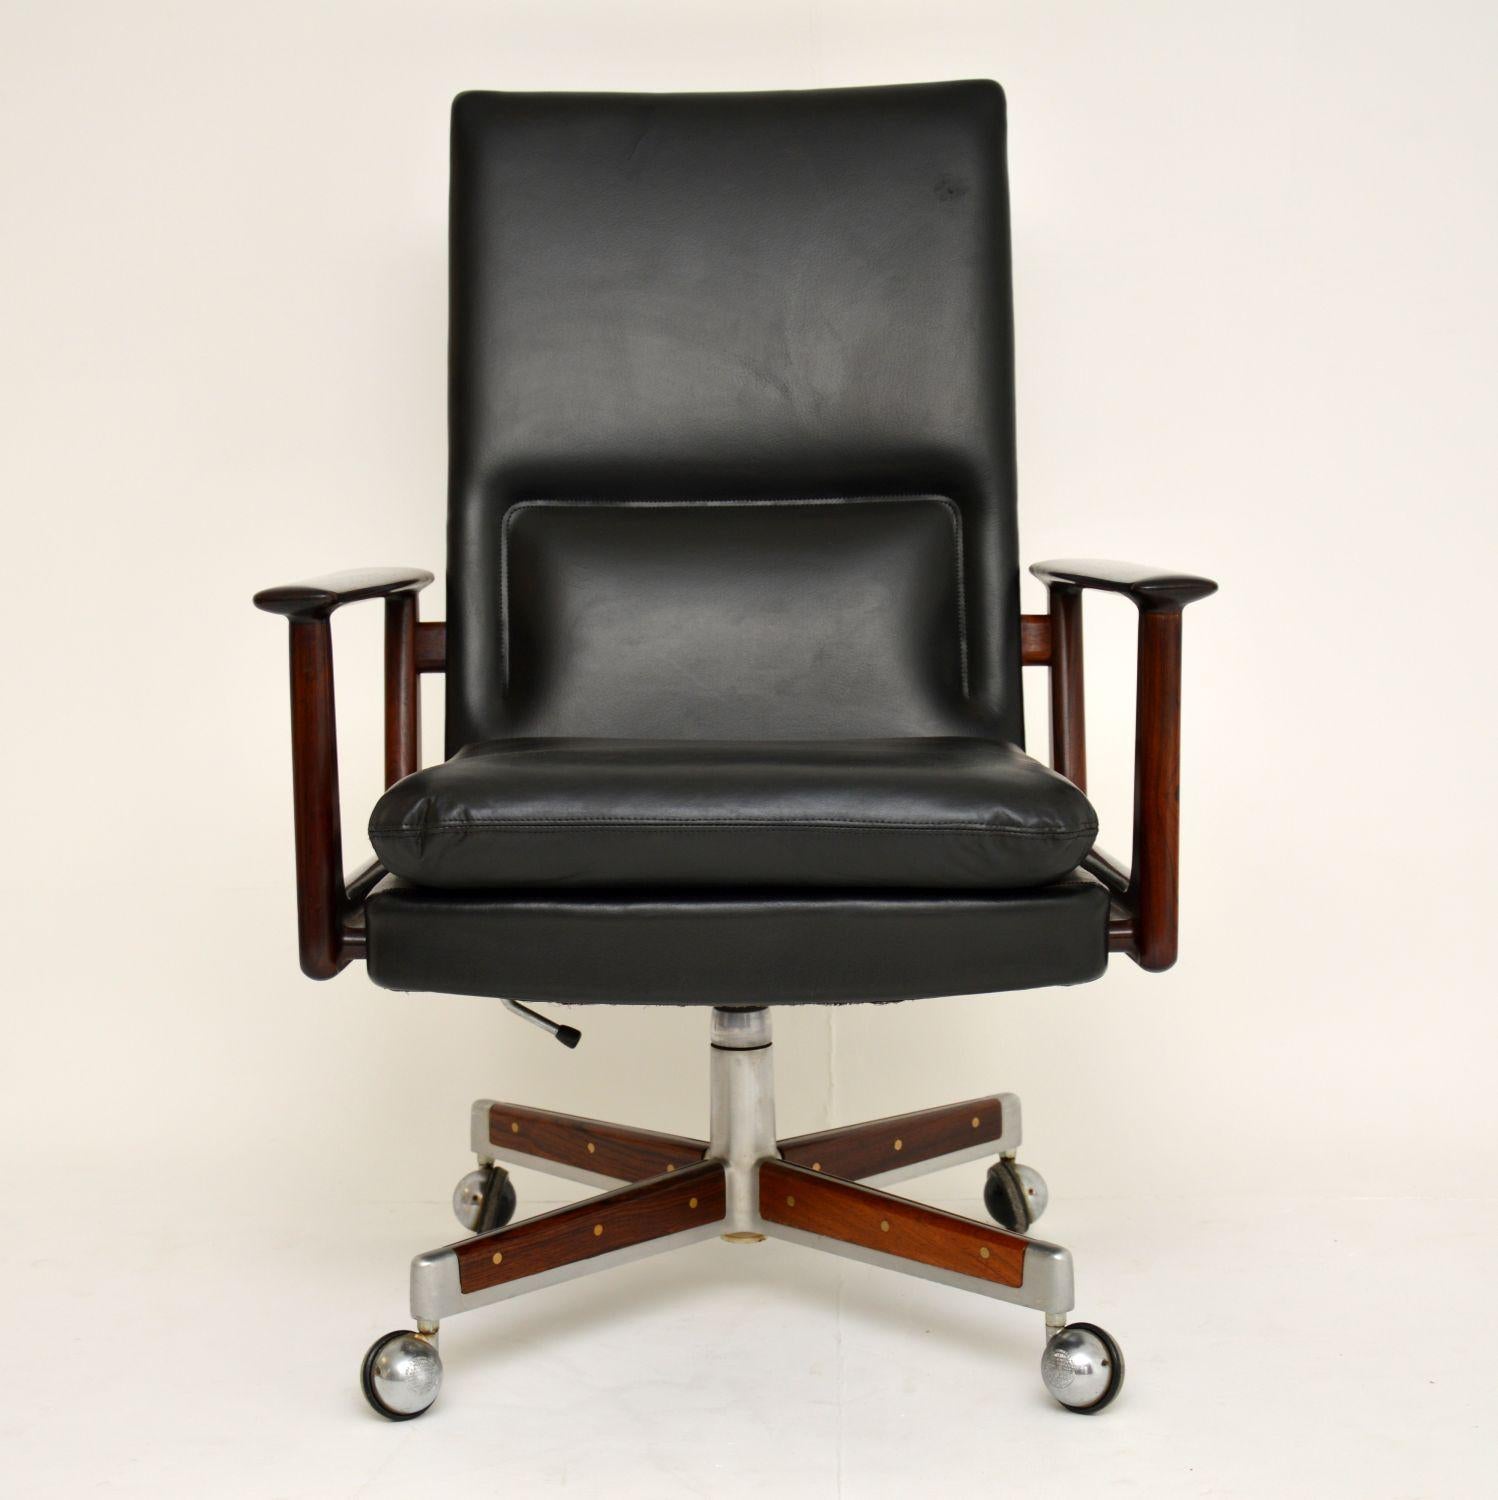 A magnificent Danish leather and wood swivel desk chair, dating from the 1960-70’s. This was designed by Arne Vodder for Sibast, it is of absolutely amazing quality. This is extremely comfortable, its well supported and has a fully working